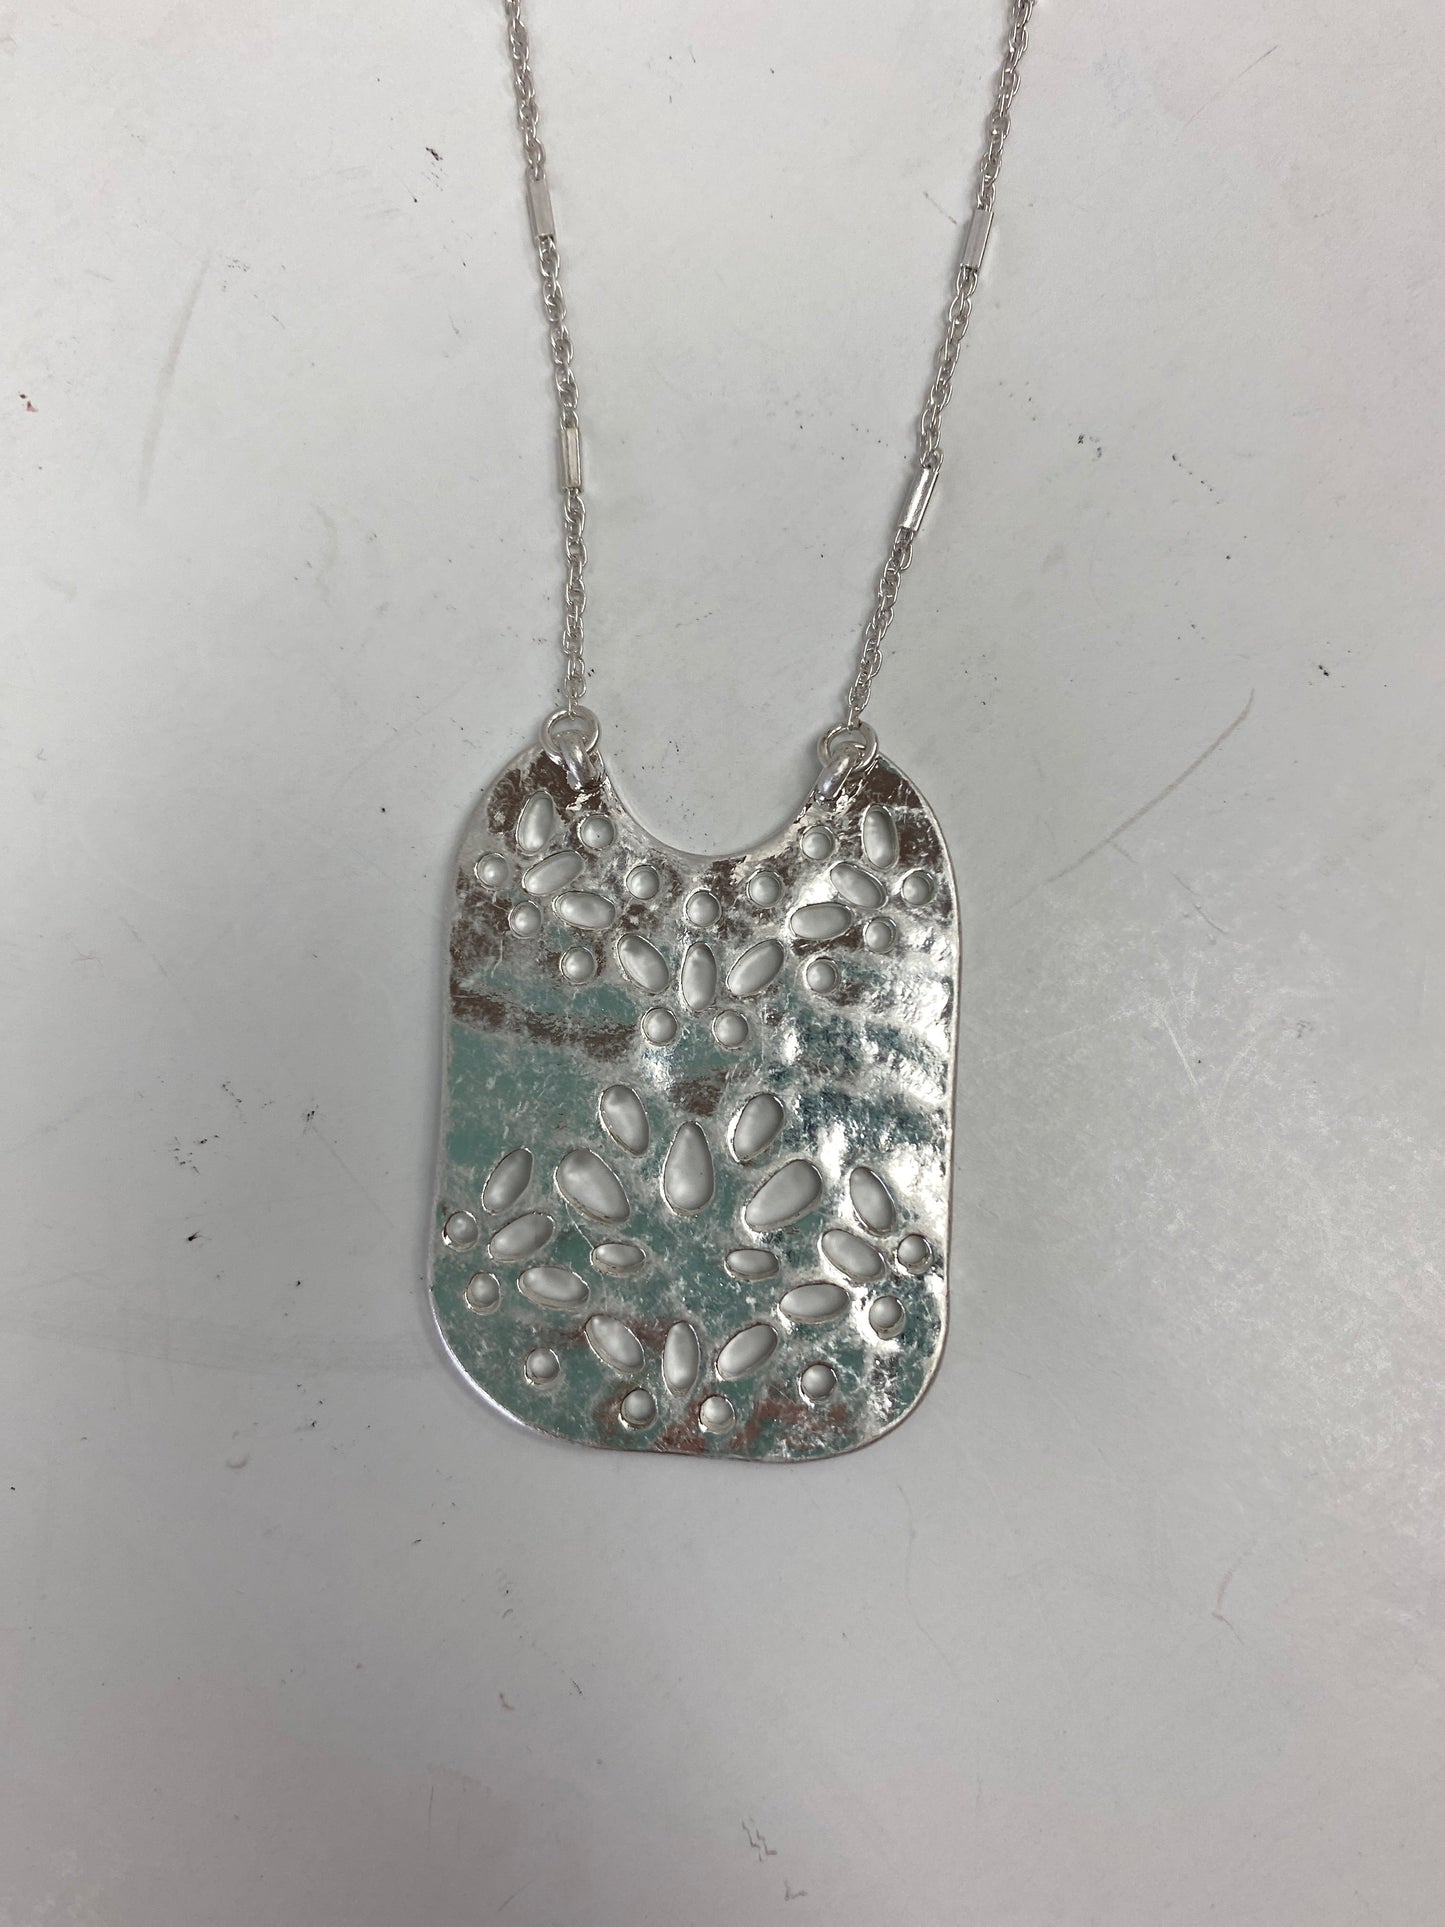 Necklace Charm By J Jill